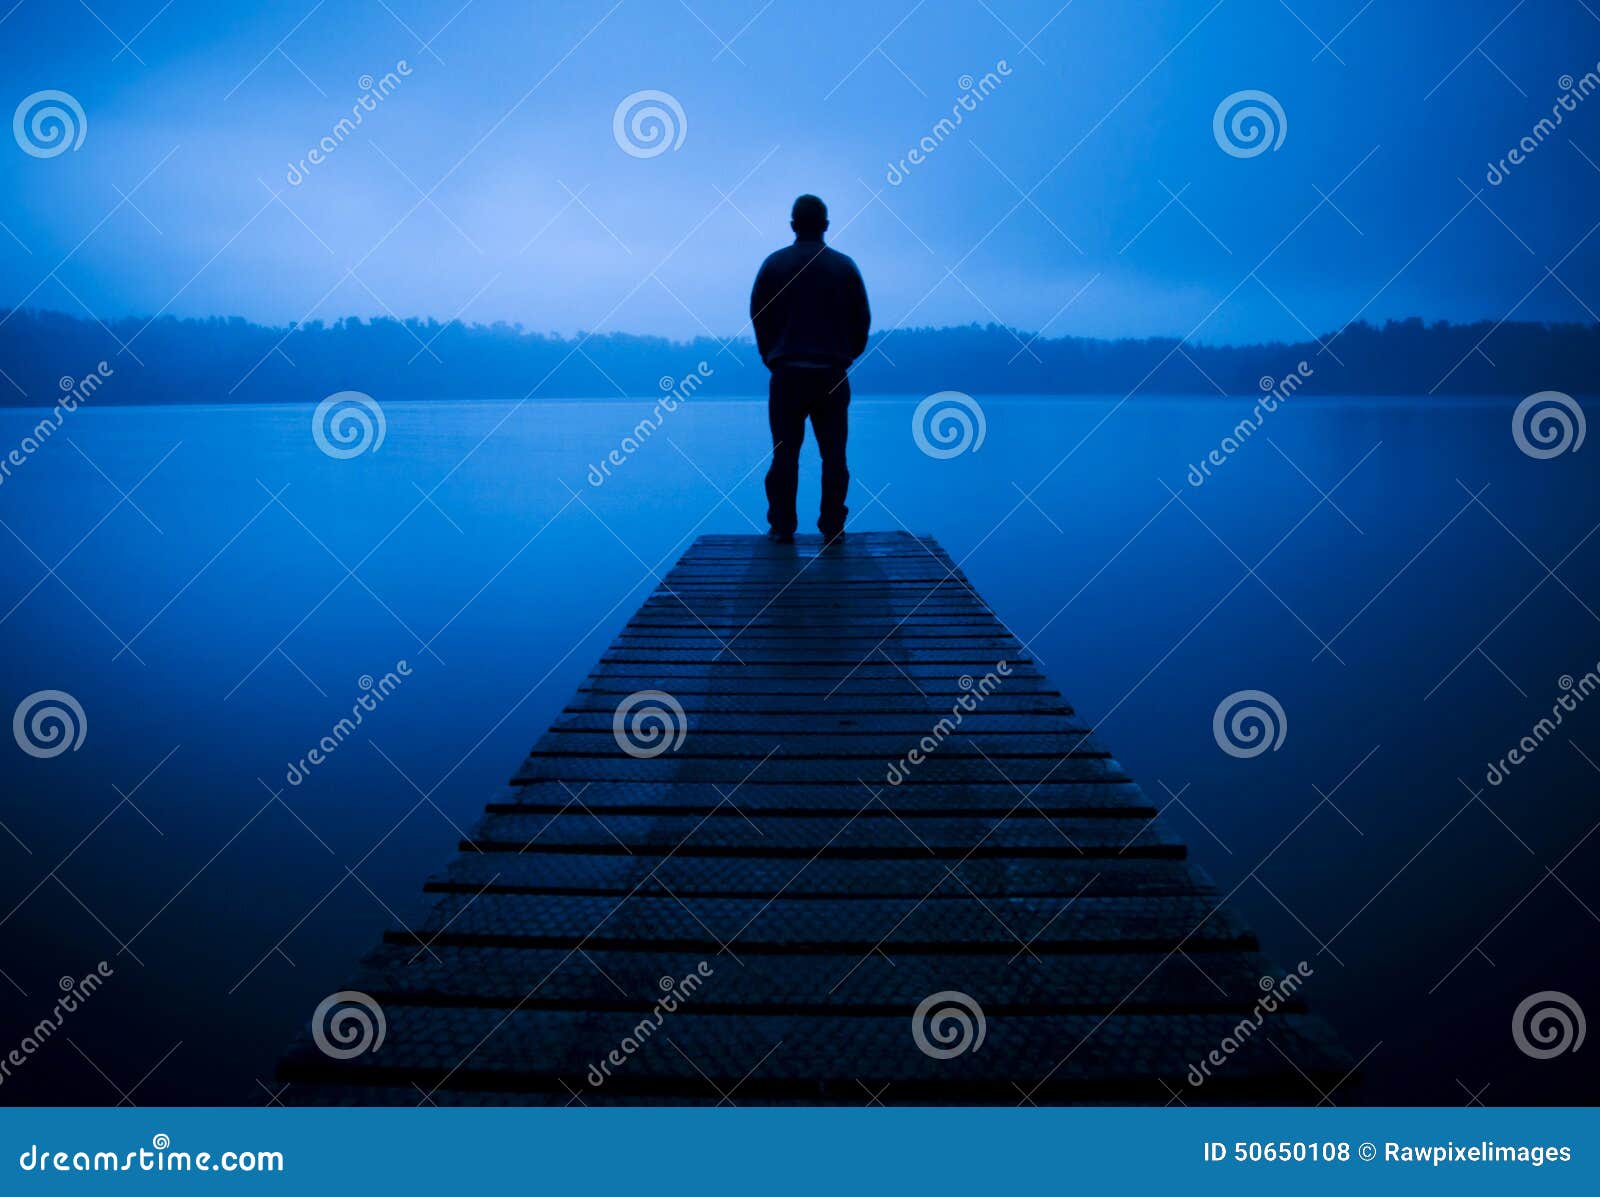 man standing on a jetty by tranquil lake concept